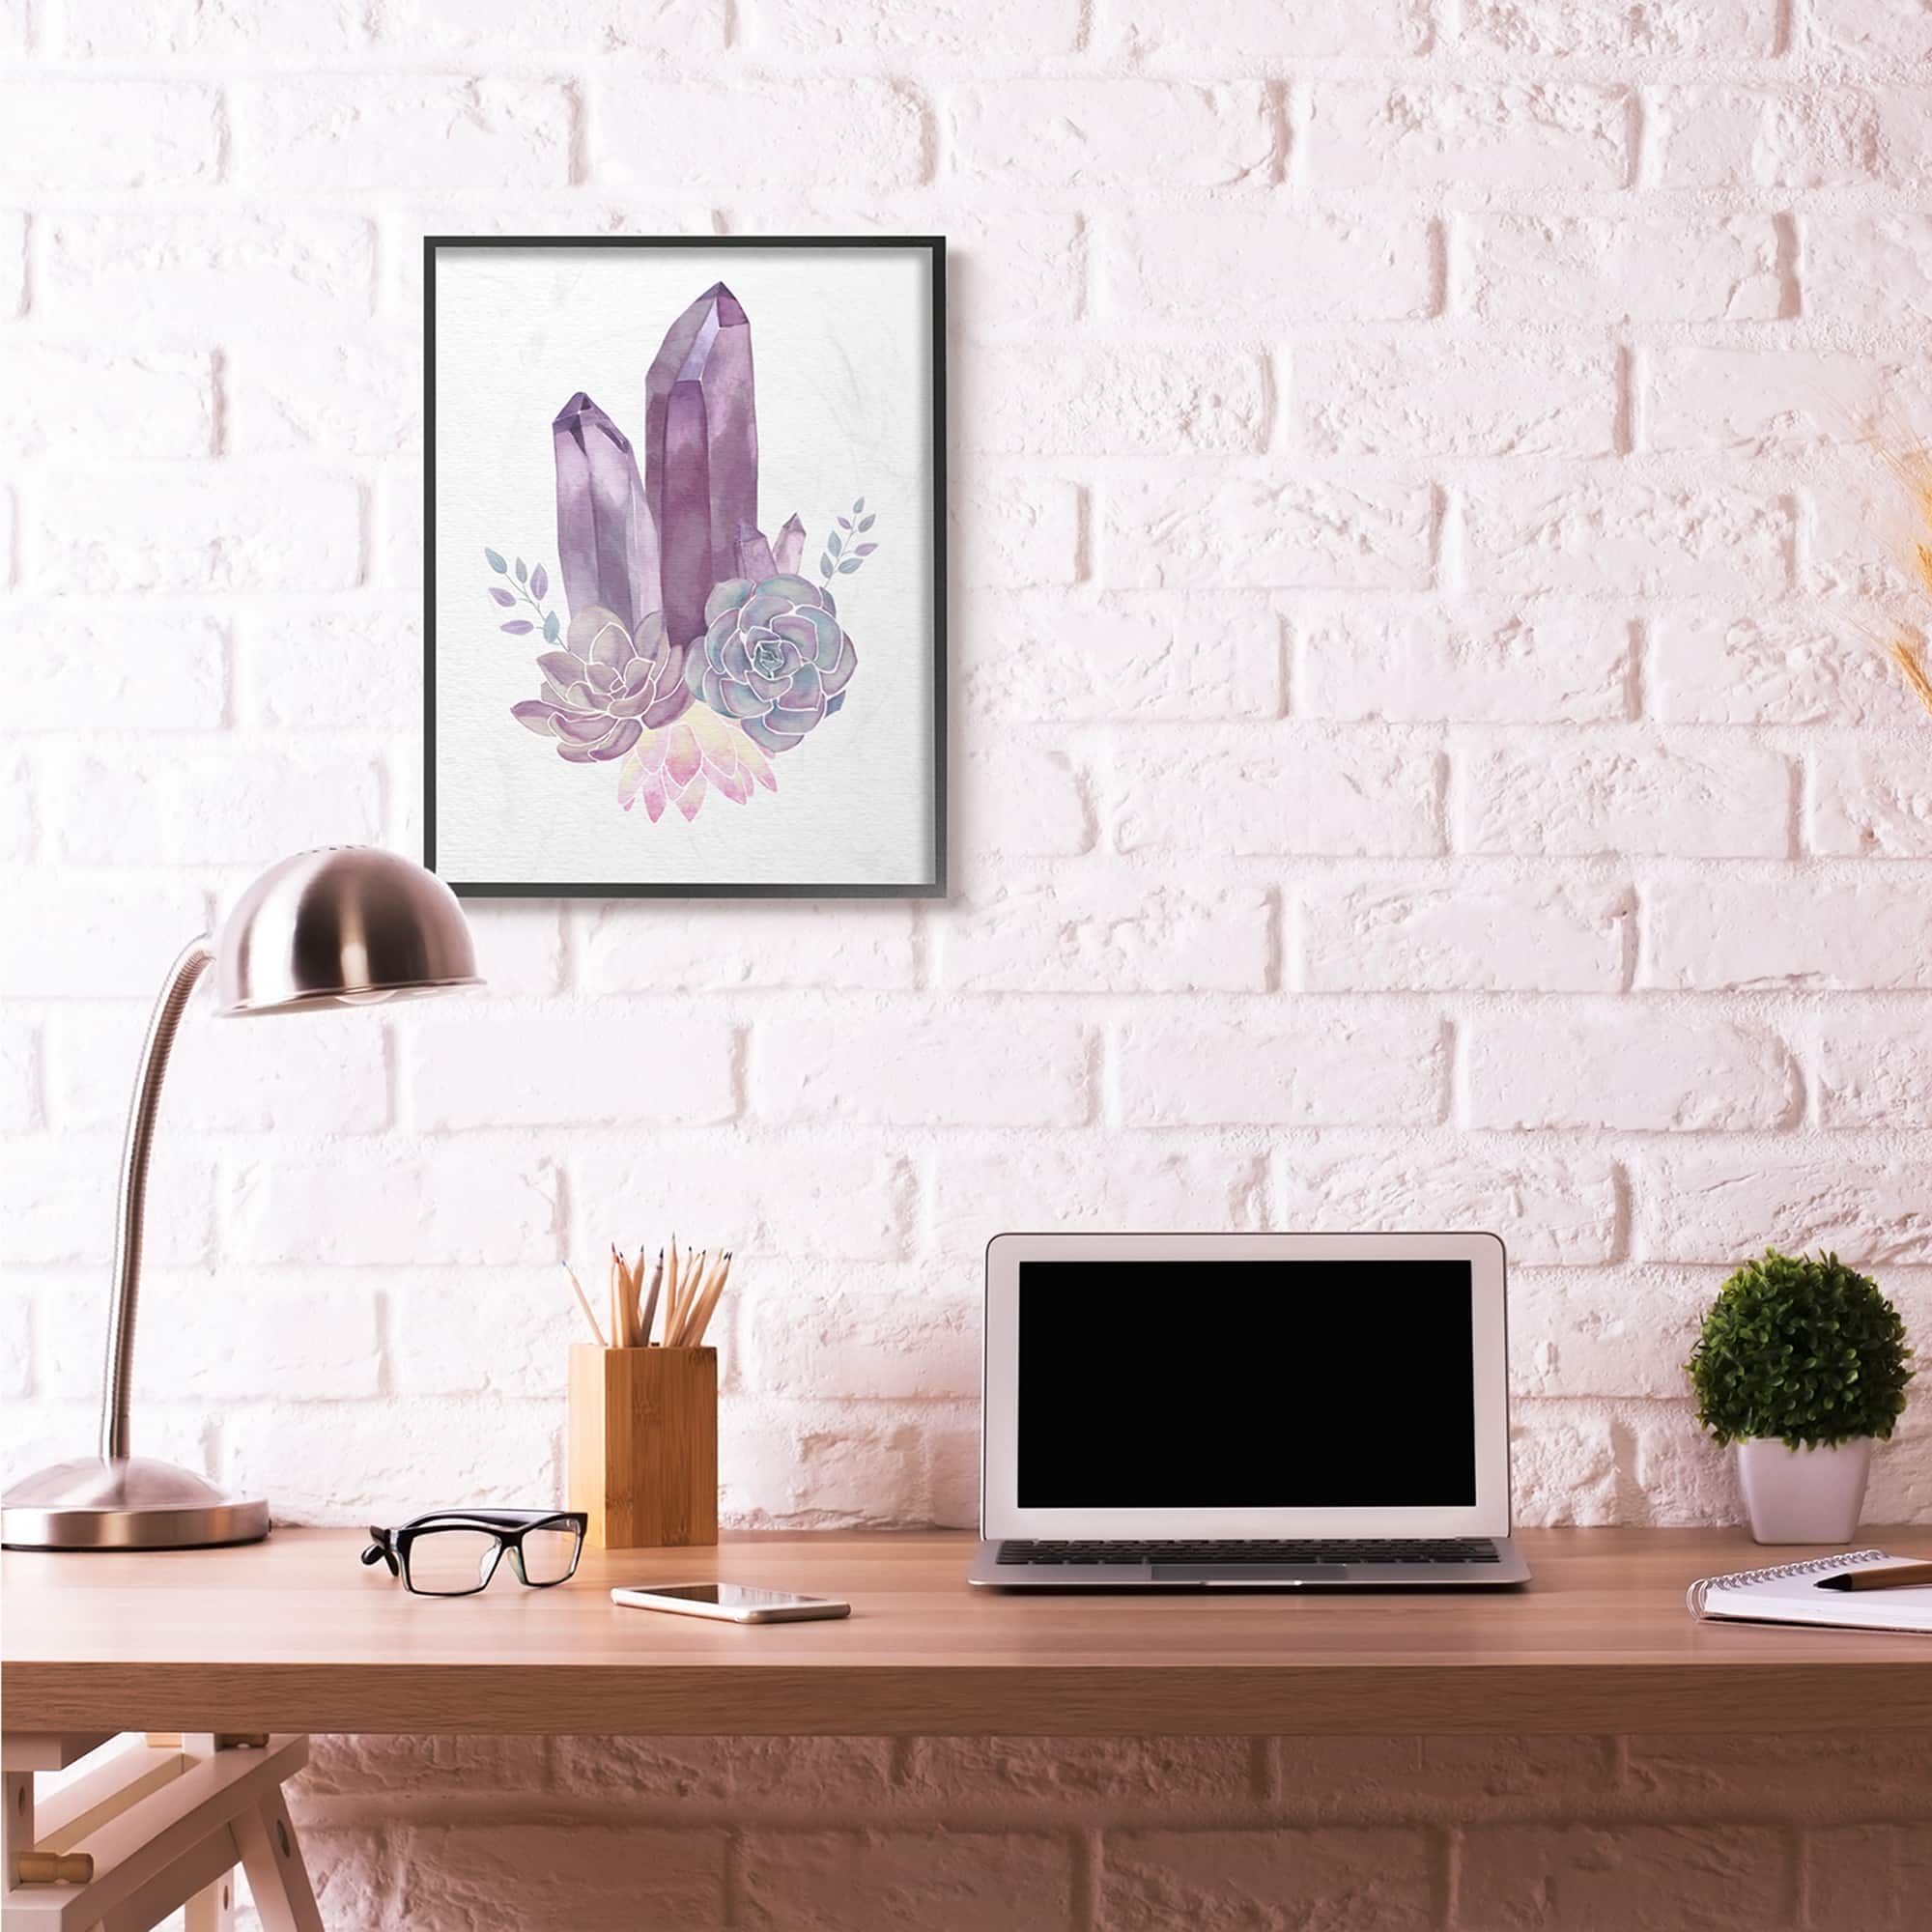 Stupell Industries Succulent Crystal Flower Purple Blue Watercolor Painting in Black Frame Wall Art